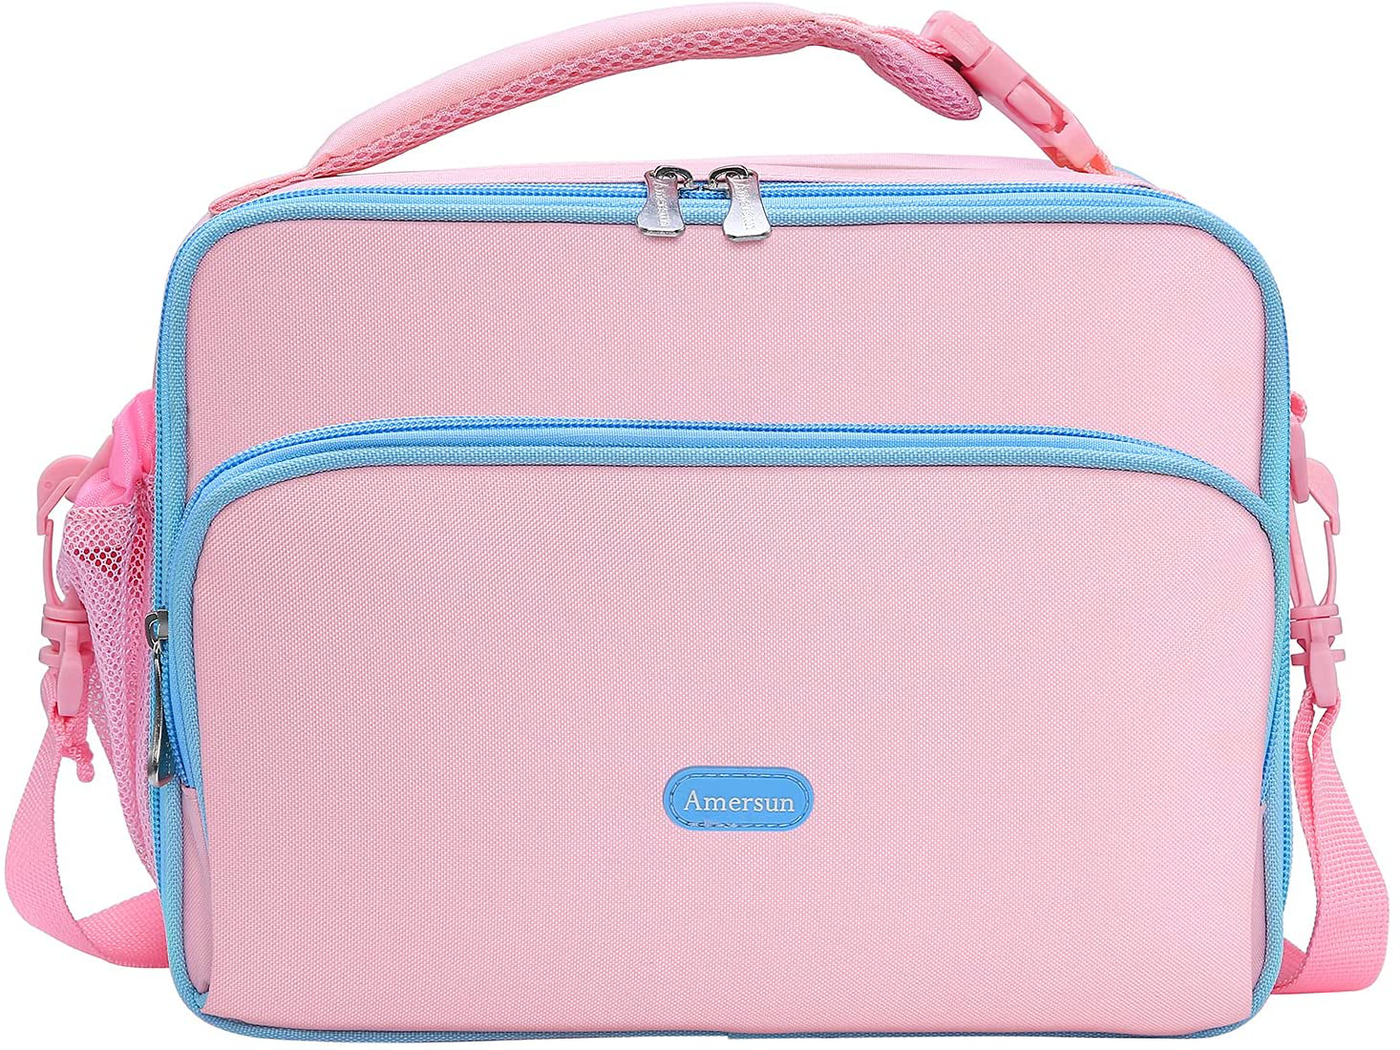 Amersun Lunch Bag for Kids - Padded Durable Insulated Lunch Box with Adjustable Shulder Strap & 2 Pockets for Girls Toddler School,Thermal Freezable Lunch Cooler Tote Keep Food Warm Cold Fresh,Pink